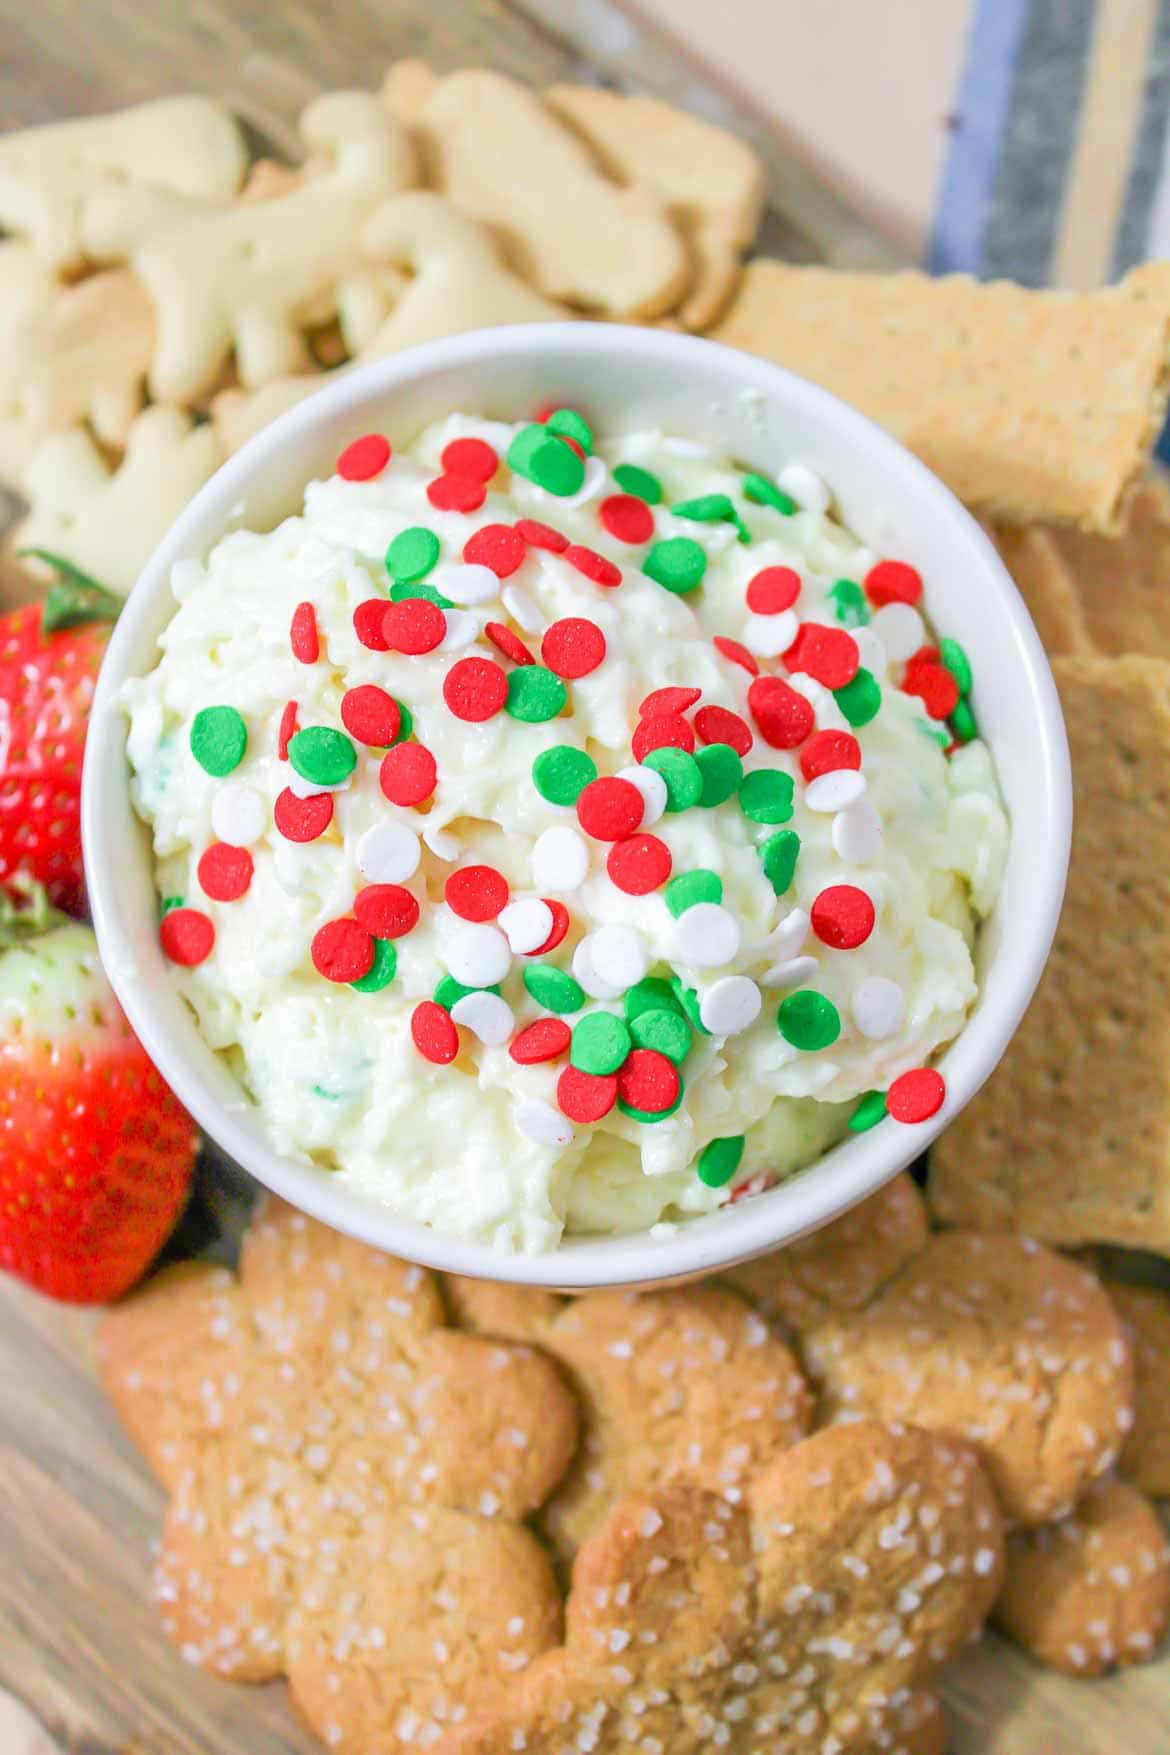 Cake Batter Dip with cream cheese